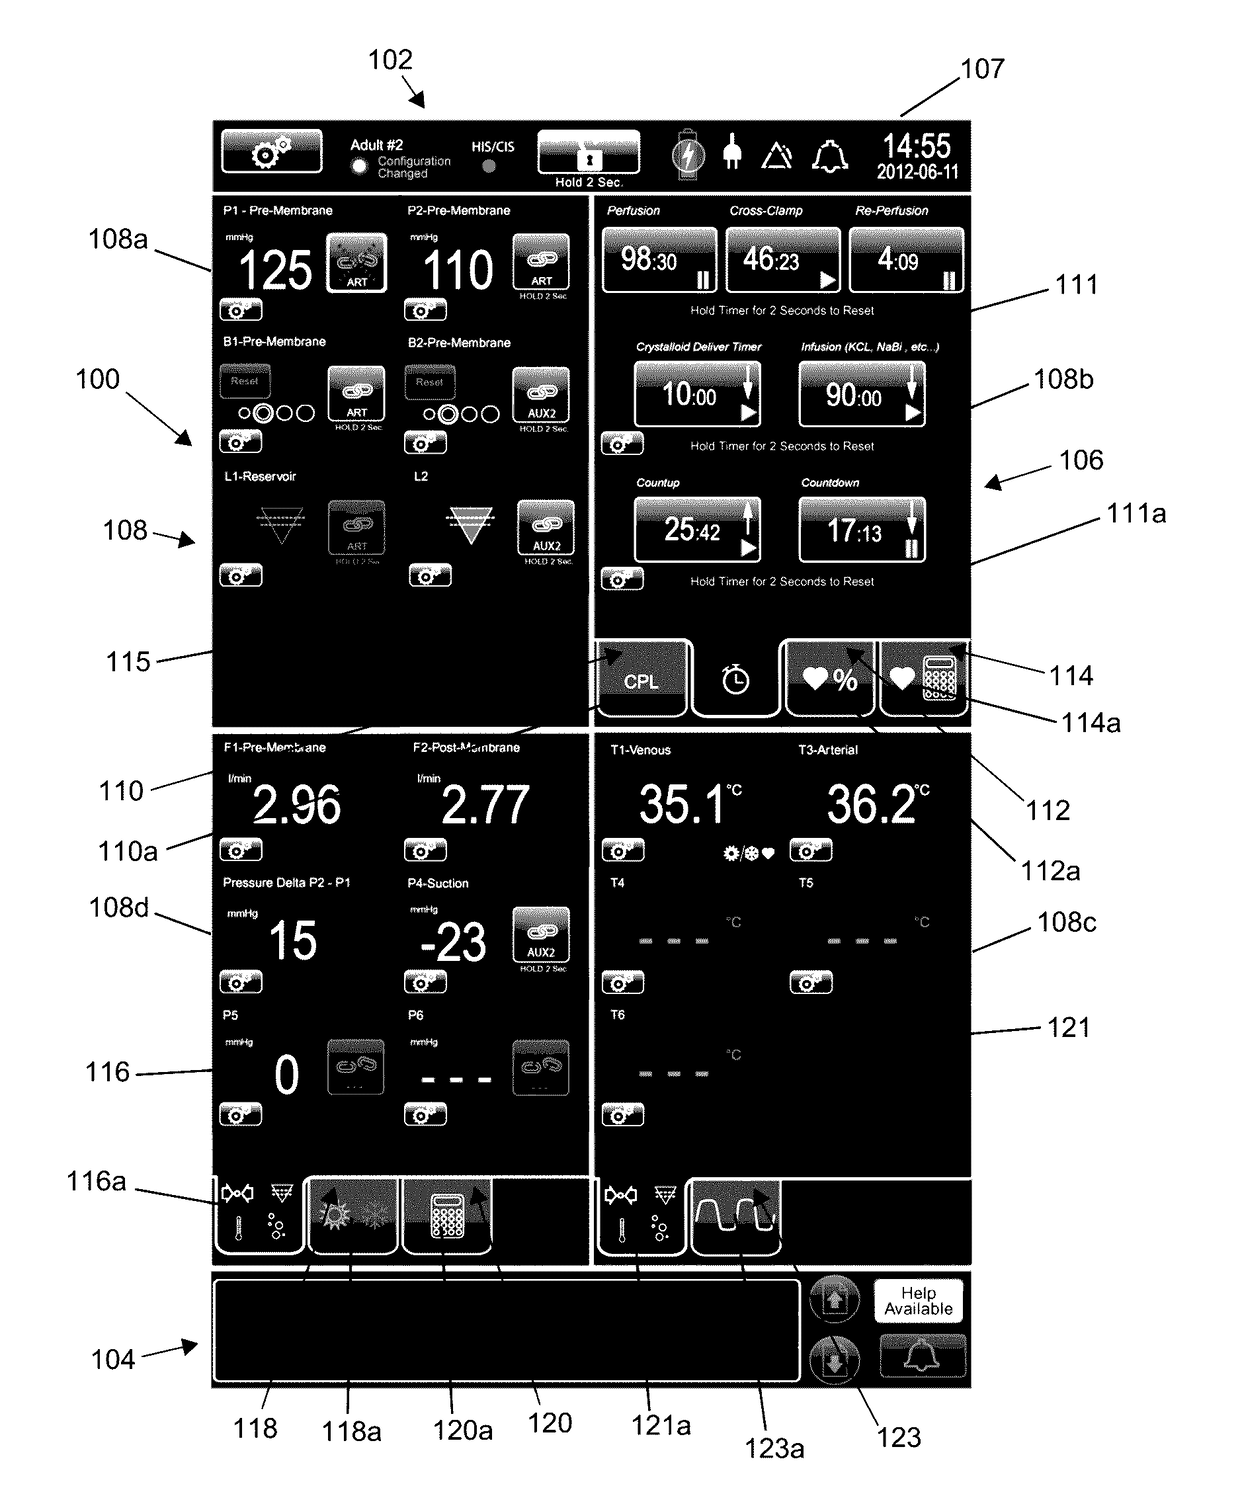 User interface system for a medical device